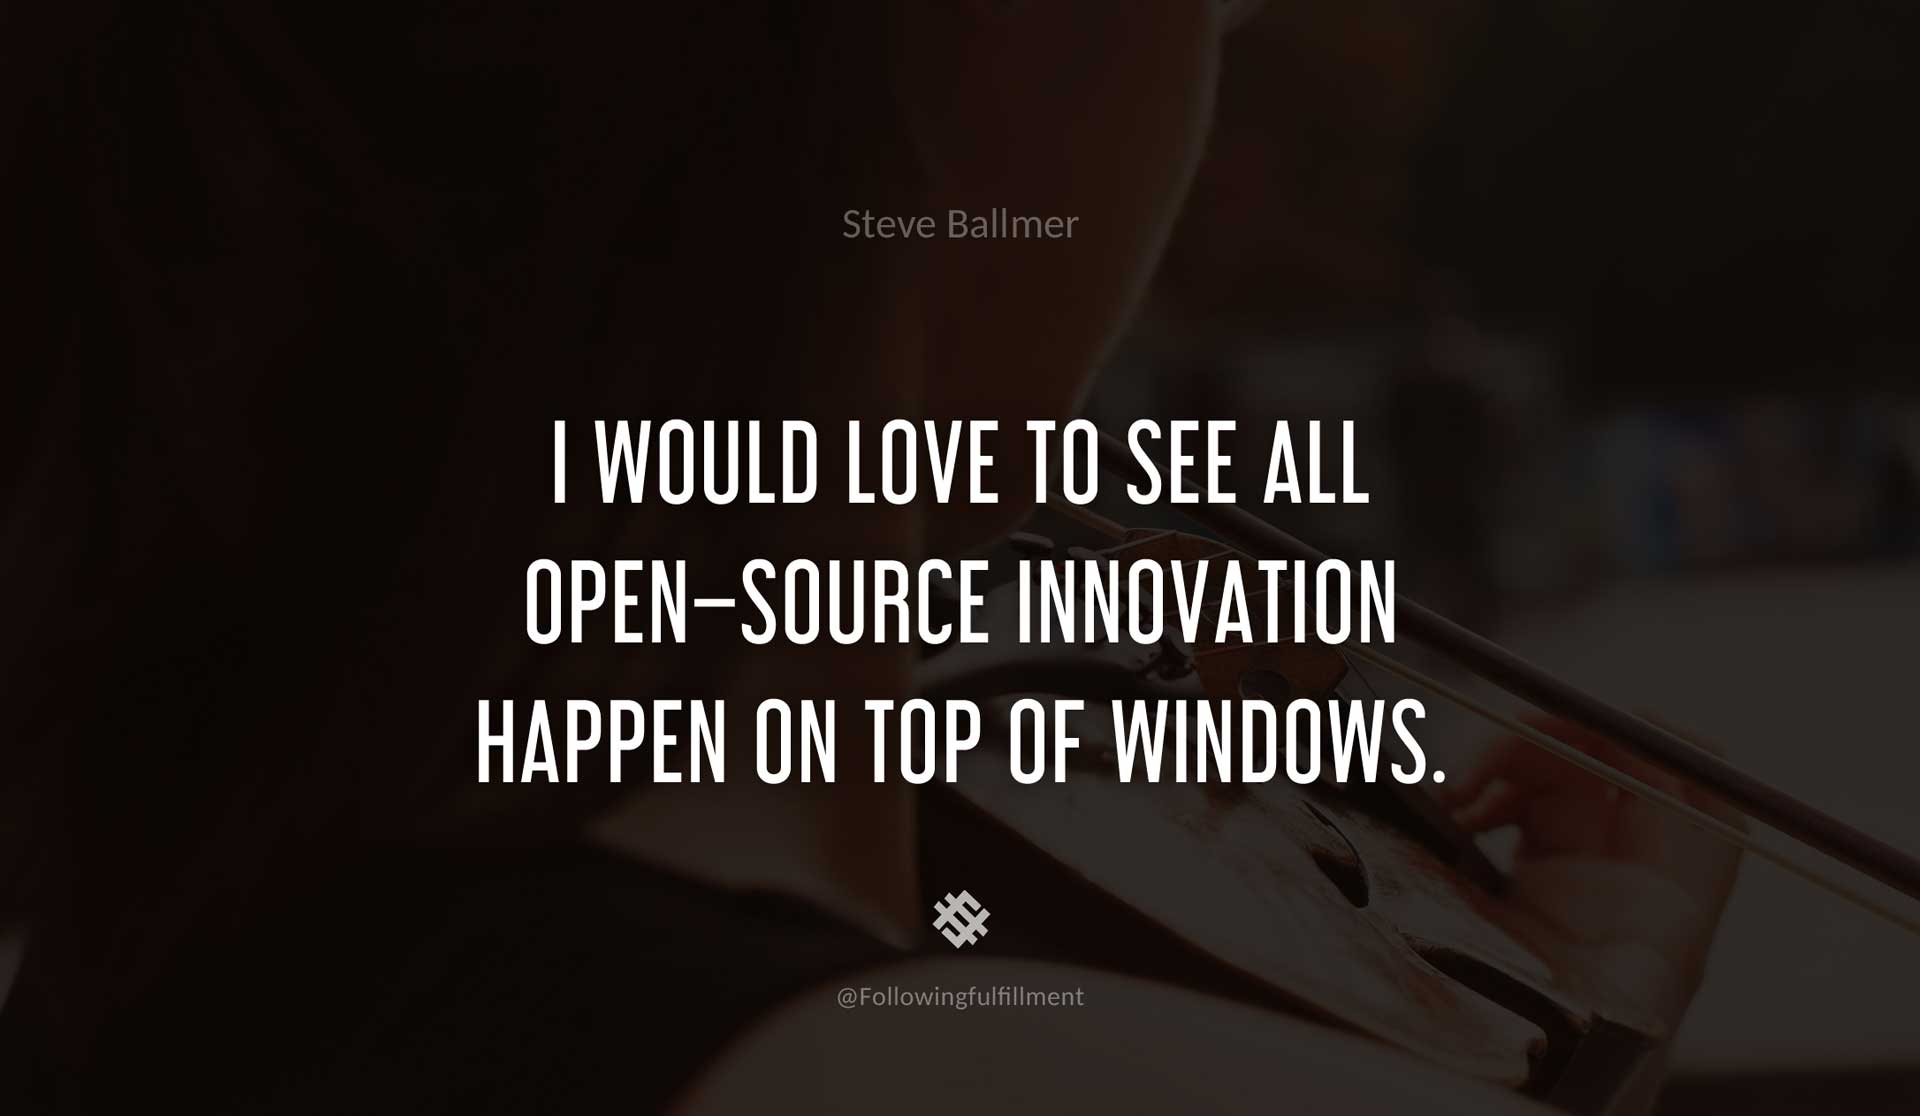 I-would-love-to-see-all-open-source-innovation-happen-on-top-of-Windows.--STEVE-BALLMER-Quote.jpg